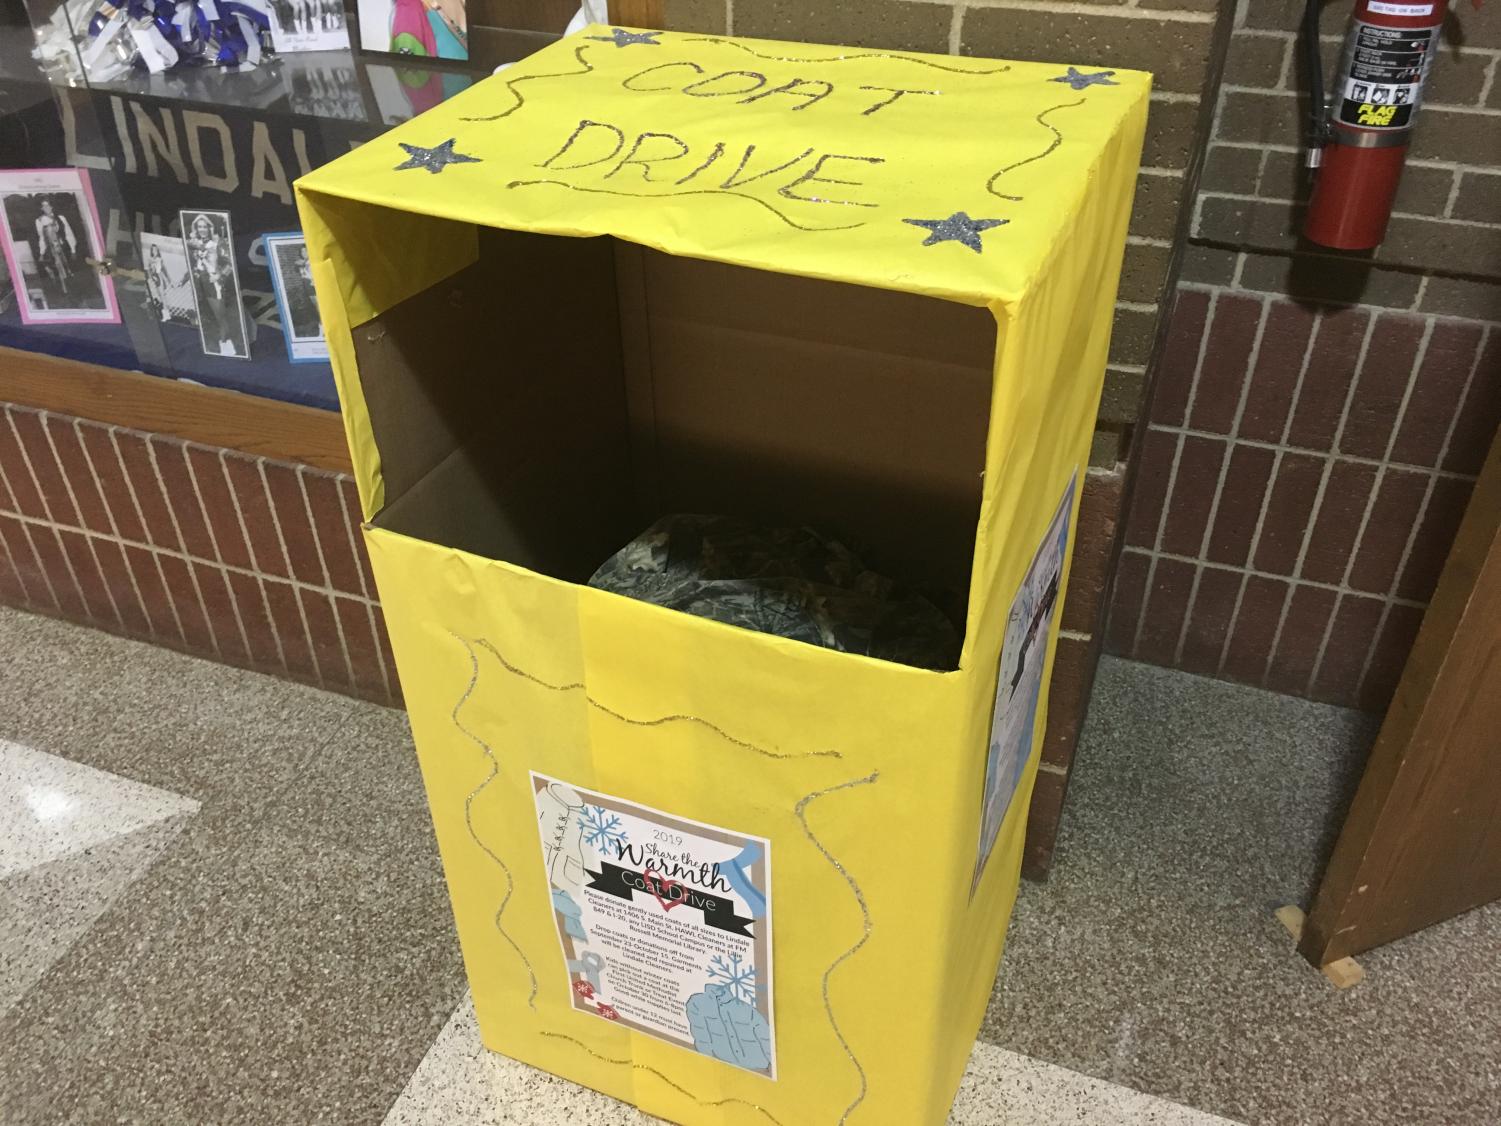 The Coat Drive Donation Box stands in the foyer afterschool only a few days after the campaign was started. Im really excited to see the joy and appreciation emitting from the kids when we give them these new coats. The coat drive is one of the most rewarding campaigns we do, Student Council parliamentarian Kevin Willis said.